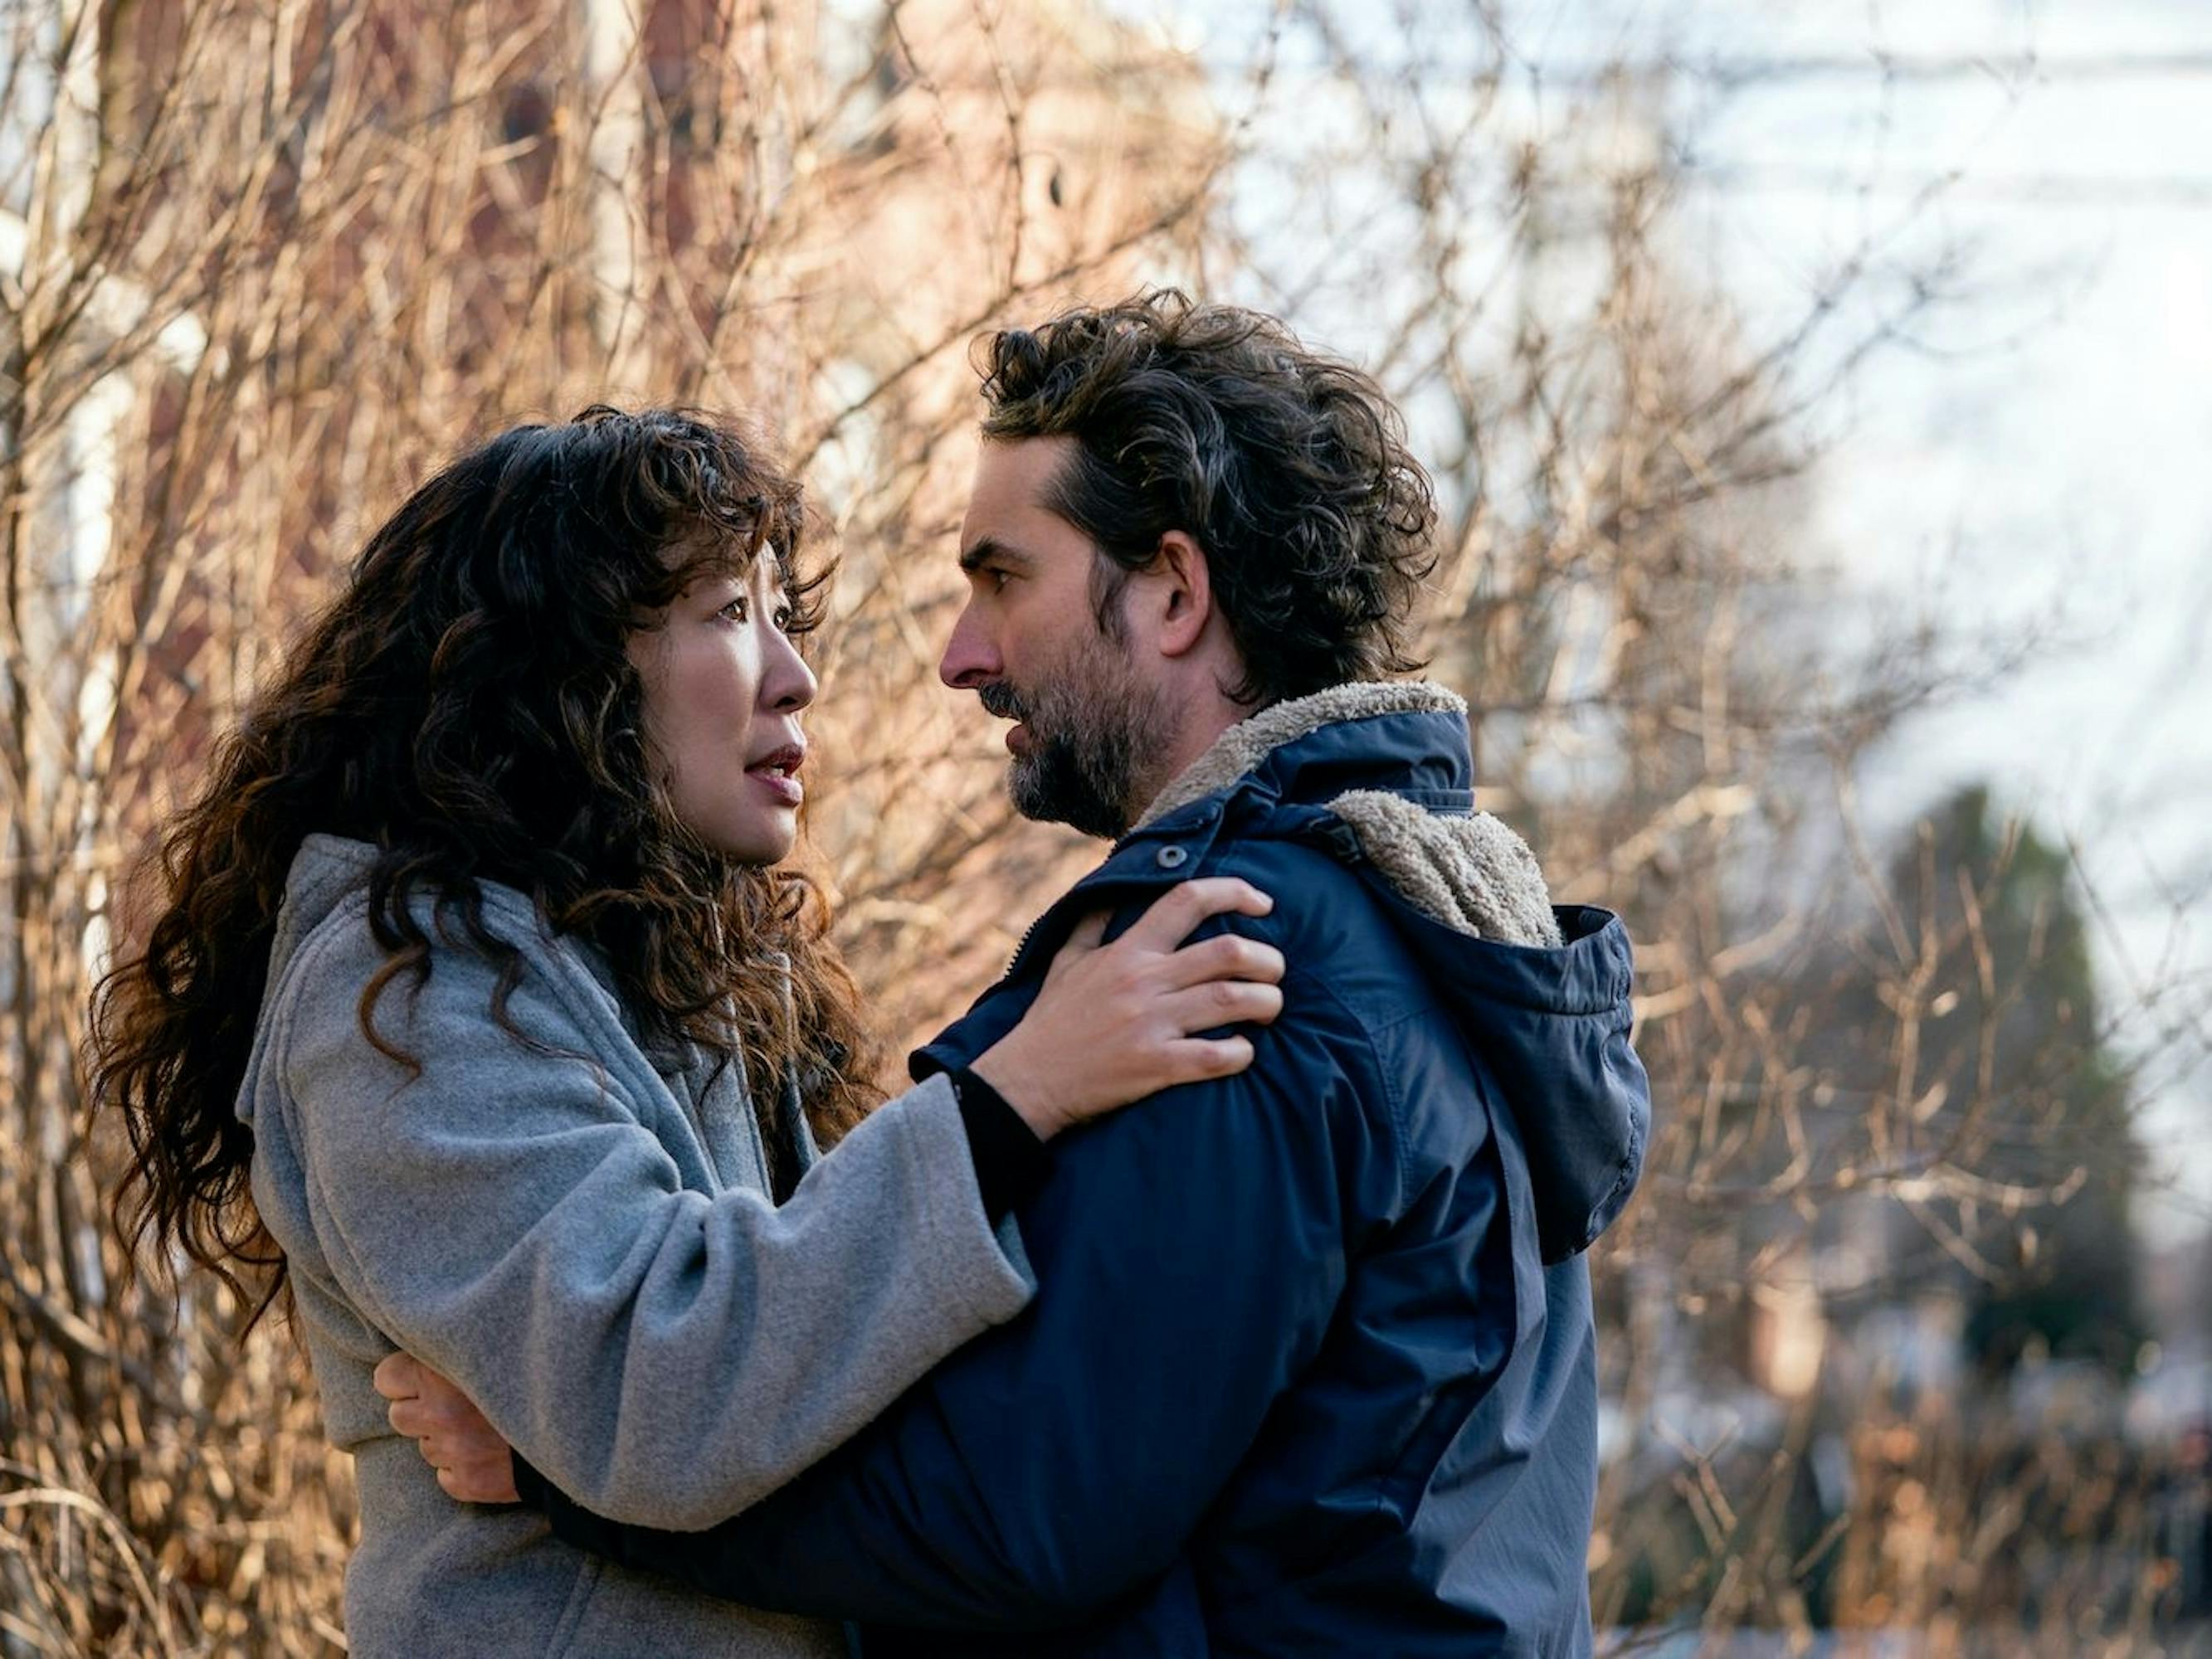 Dr. Ji-Yoon Kim (Sandra Oh) and Bill Dobson (Jay Duplass) embrace against a wintry scene. They both wear jackets and there is a bare tree behind them.